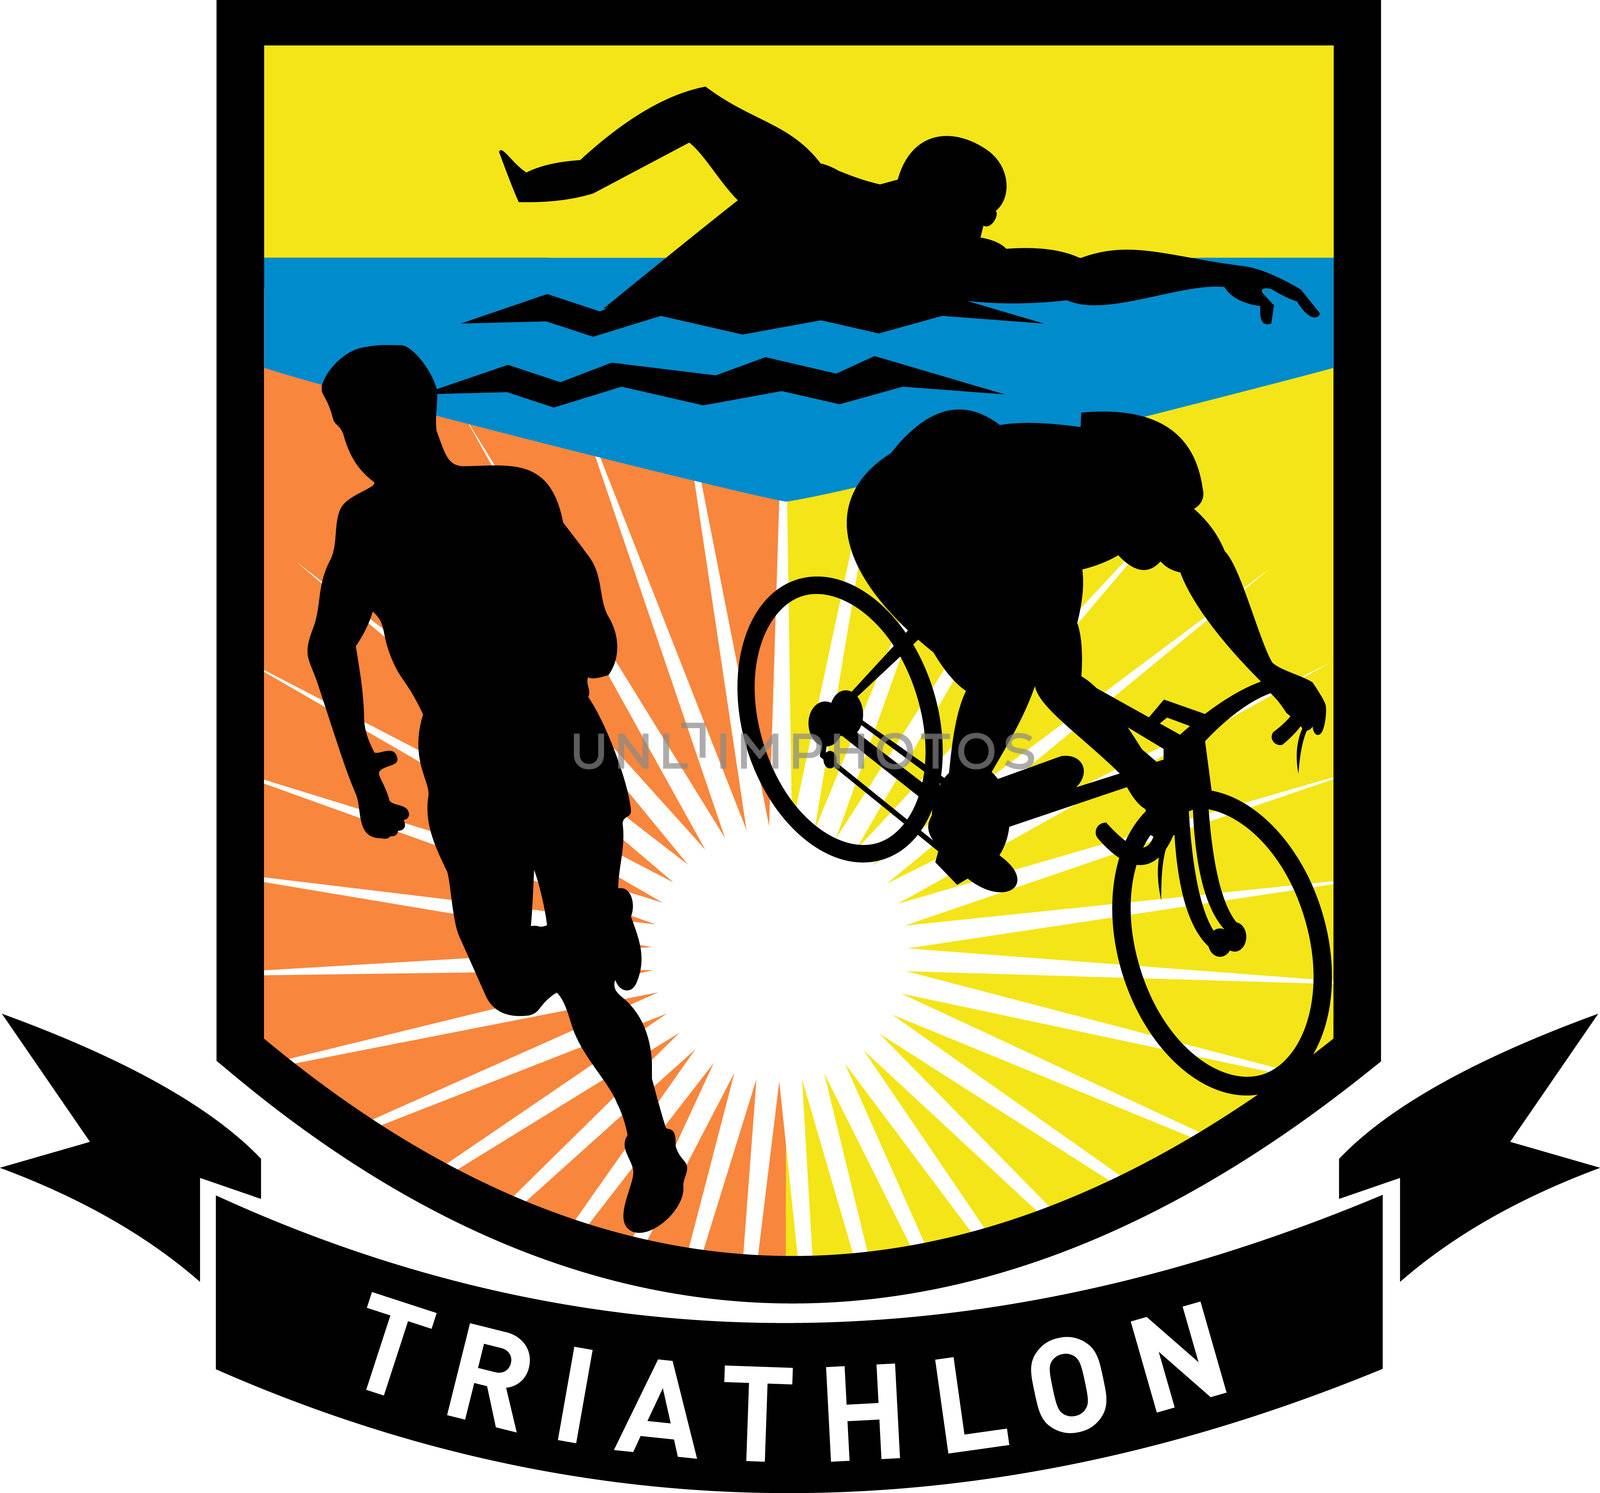 illustration showing the sport of triathlon with triathlete athlete swimming, biking or cycling and running